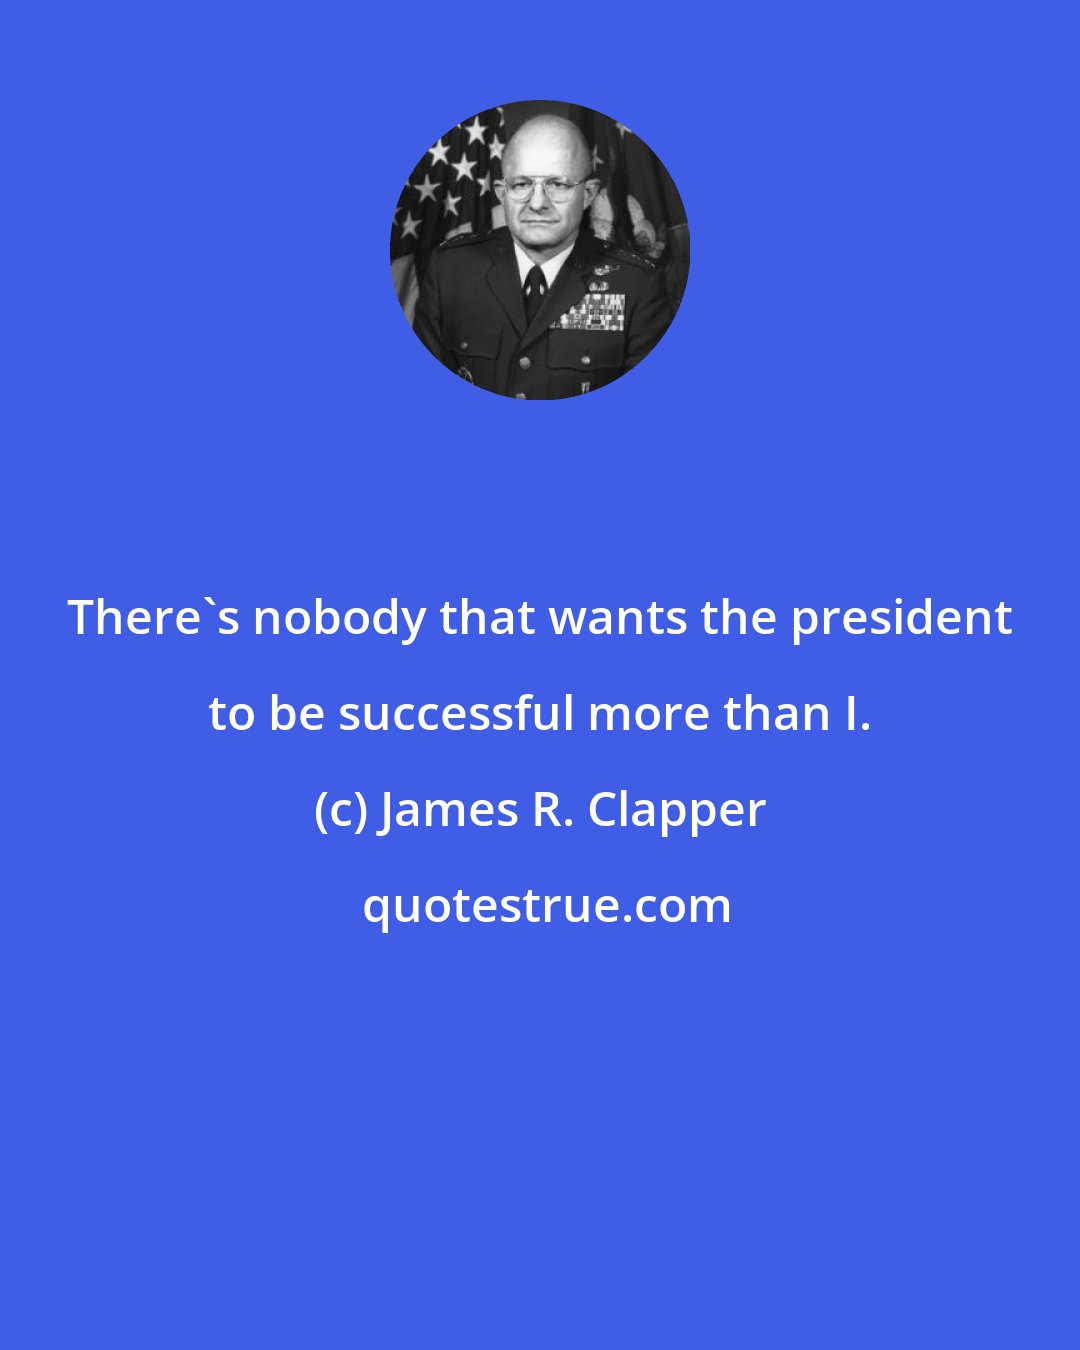 James R. Clapper: There's nobody that wants the president to be successful more than I.